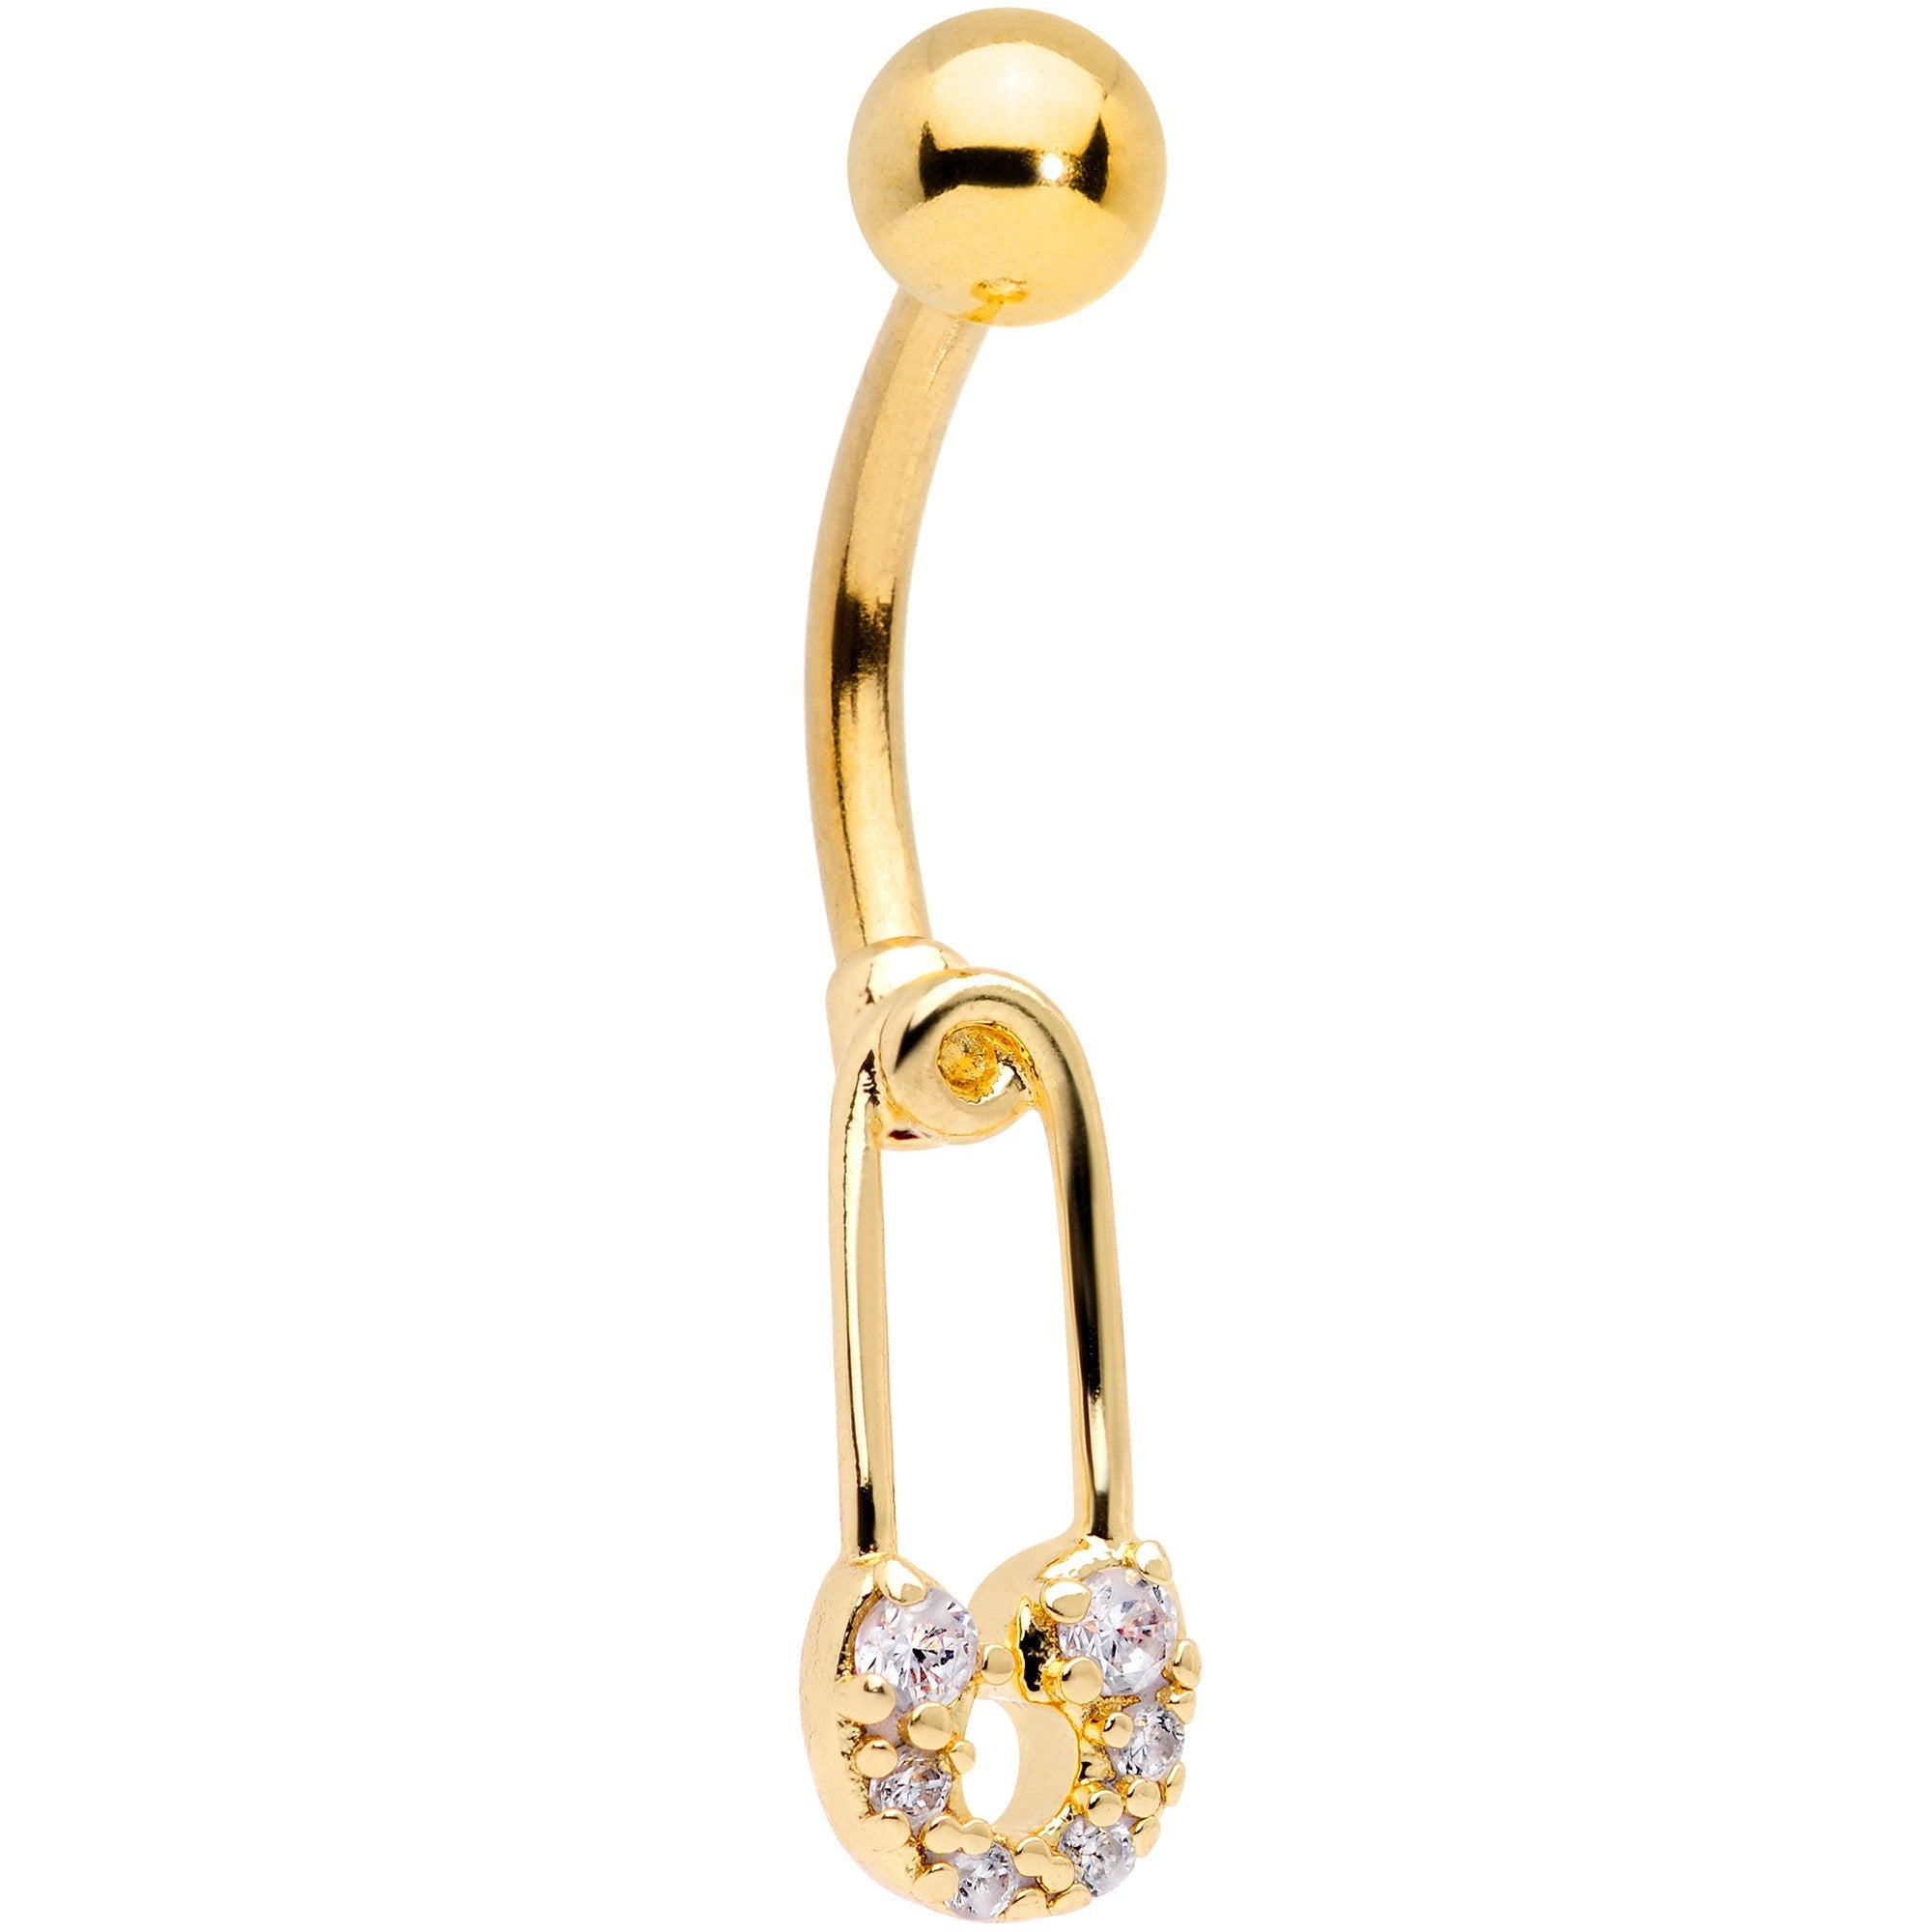 Clear CZ Gem Gold Tone Not Quite Punk Rock Safety Pin Belly Ring